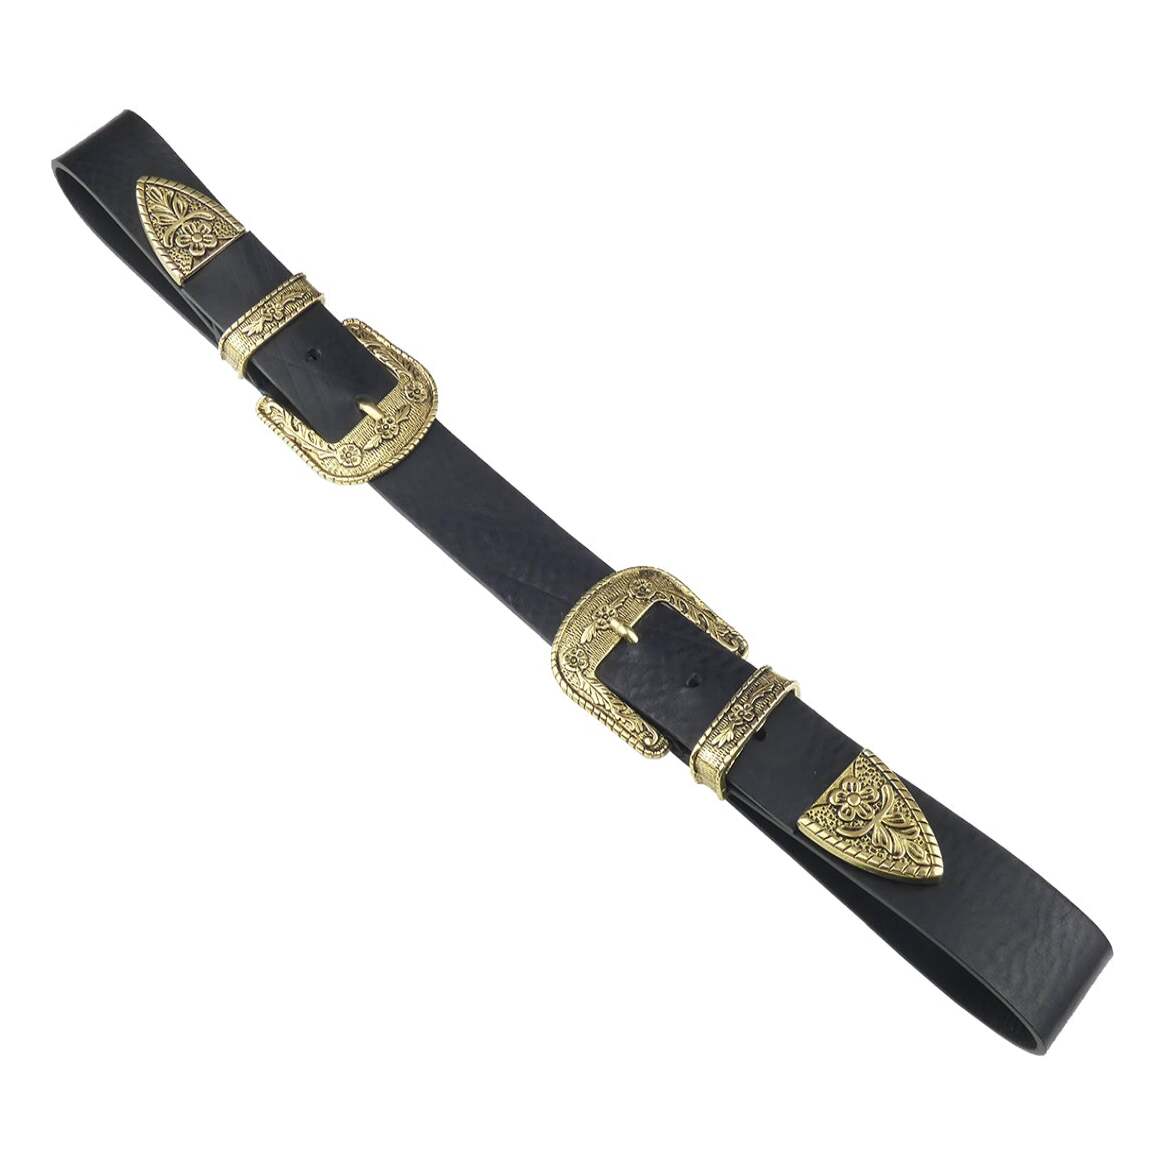 Gaudì Belt in Black Leather with Gold and Antique Silver Buckles